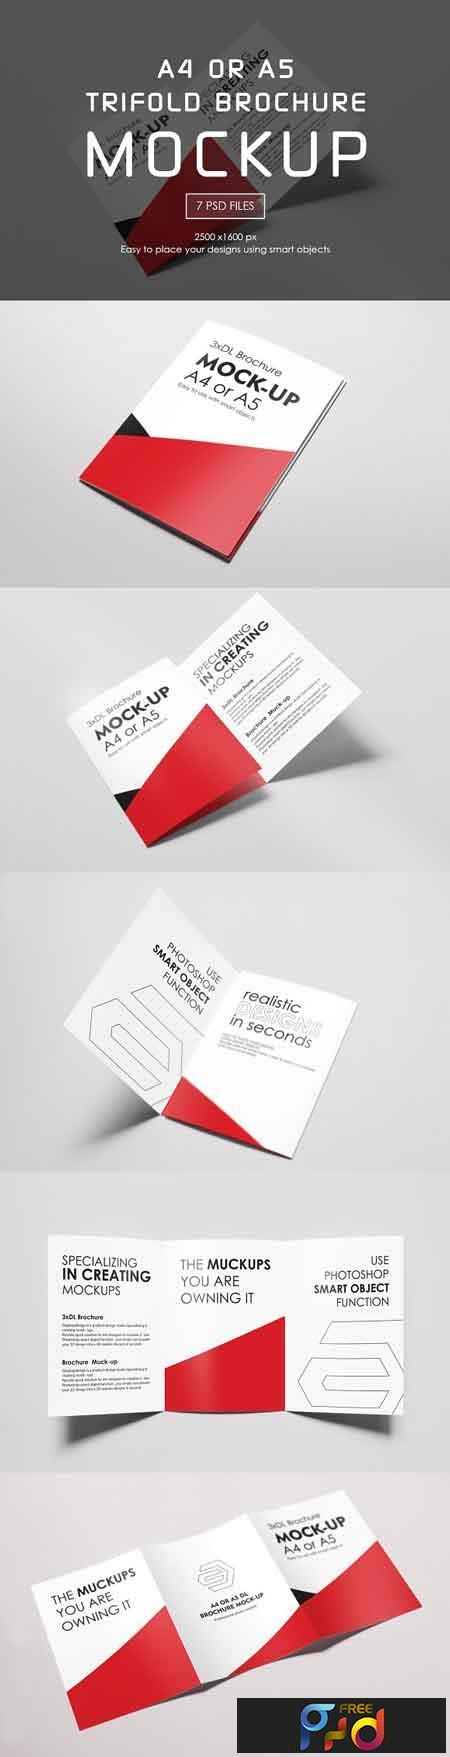 Download A4 or A5 Trifold Mockups 3210840 - FreePSDvn